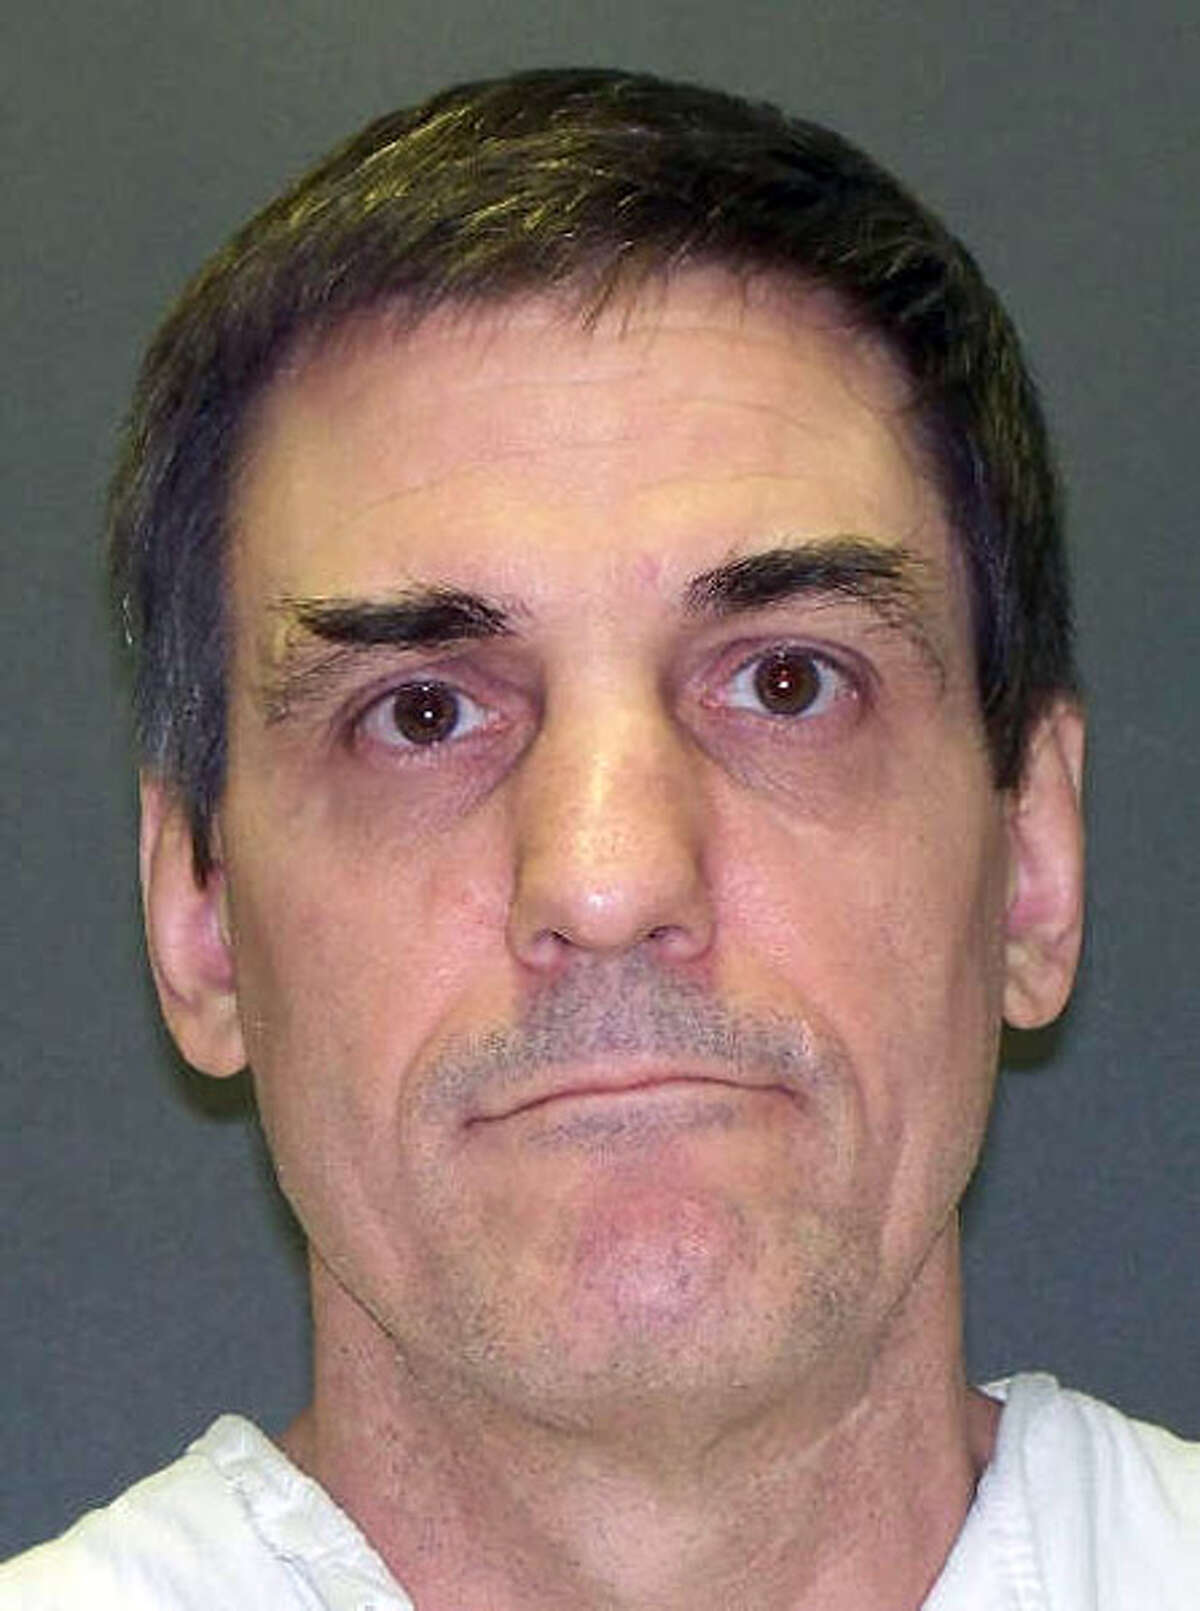 FILE - This file handout photo provided by the Texas Department of Criminal Justice shows Scott Panetti. A federal appeals court is considering whether Panetti should be spared from execution Wednesday, Dec. 3, 2014, so he can undergo new mental competency examinations to support arguments he's too delusional to understand why he's being punished. (AP Photo/Texas Department of Criminal Justice)